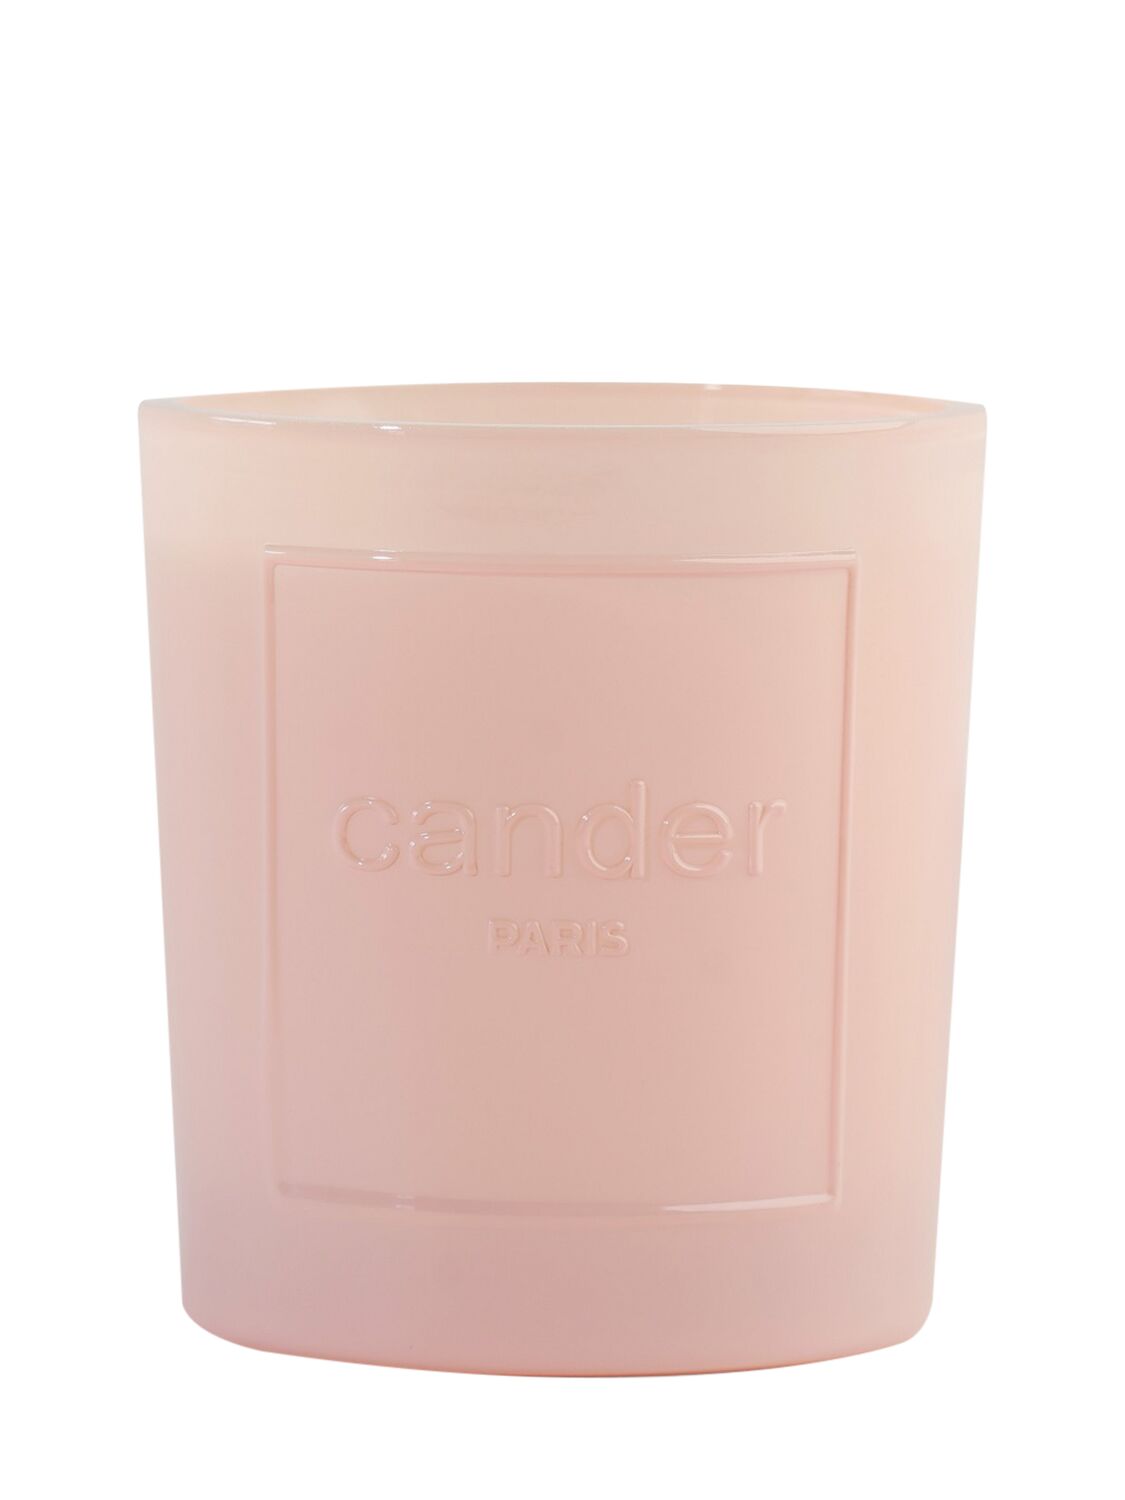 Cander Paris Rose Candle In Pink